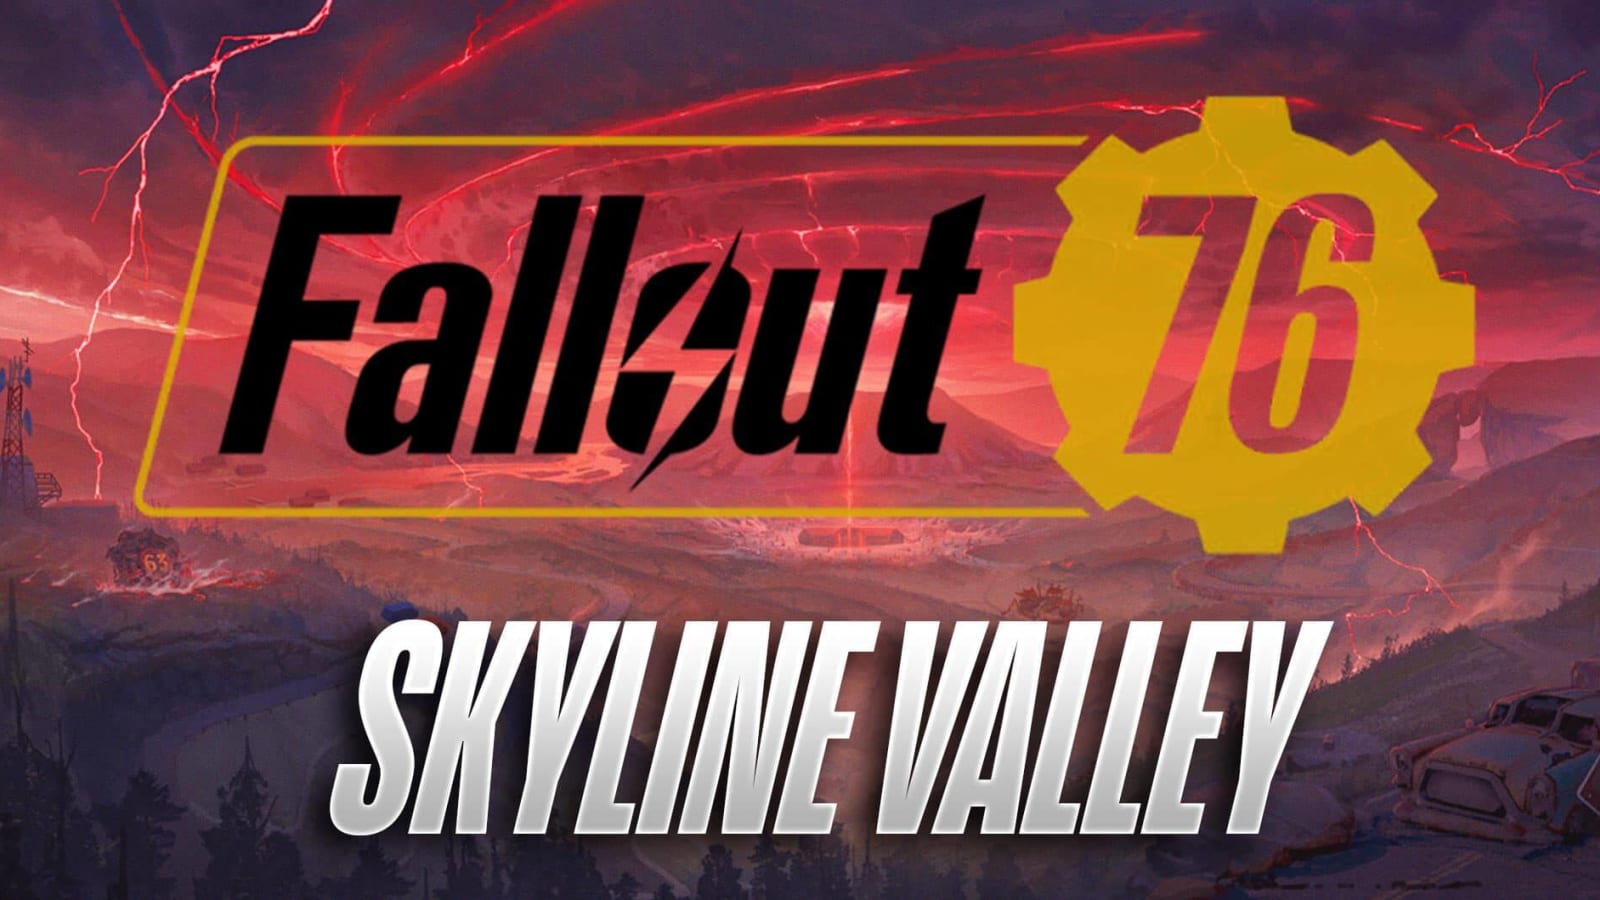 Fallout 76 Skyline Valley Release Date, Trailer, Story